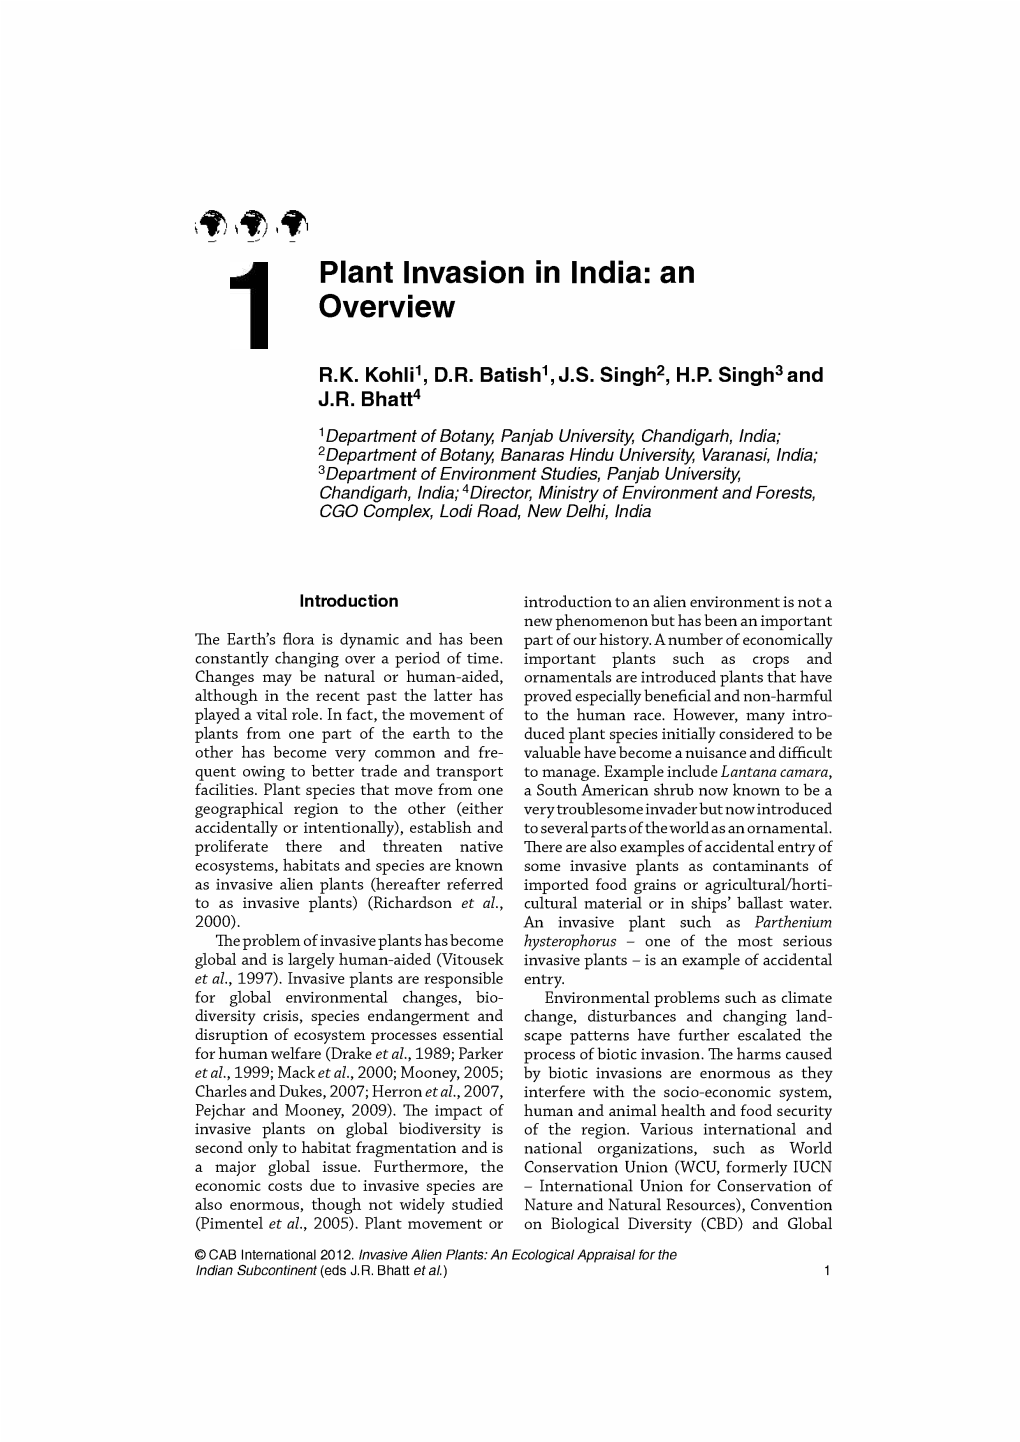 Plant Invasion in India: an Overview